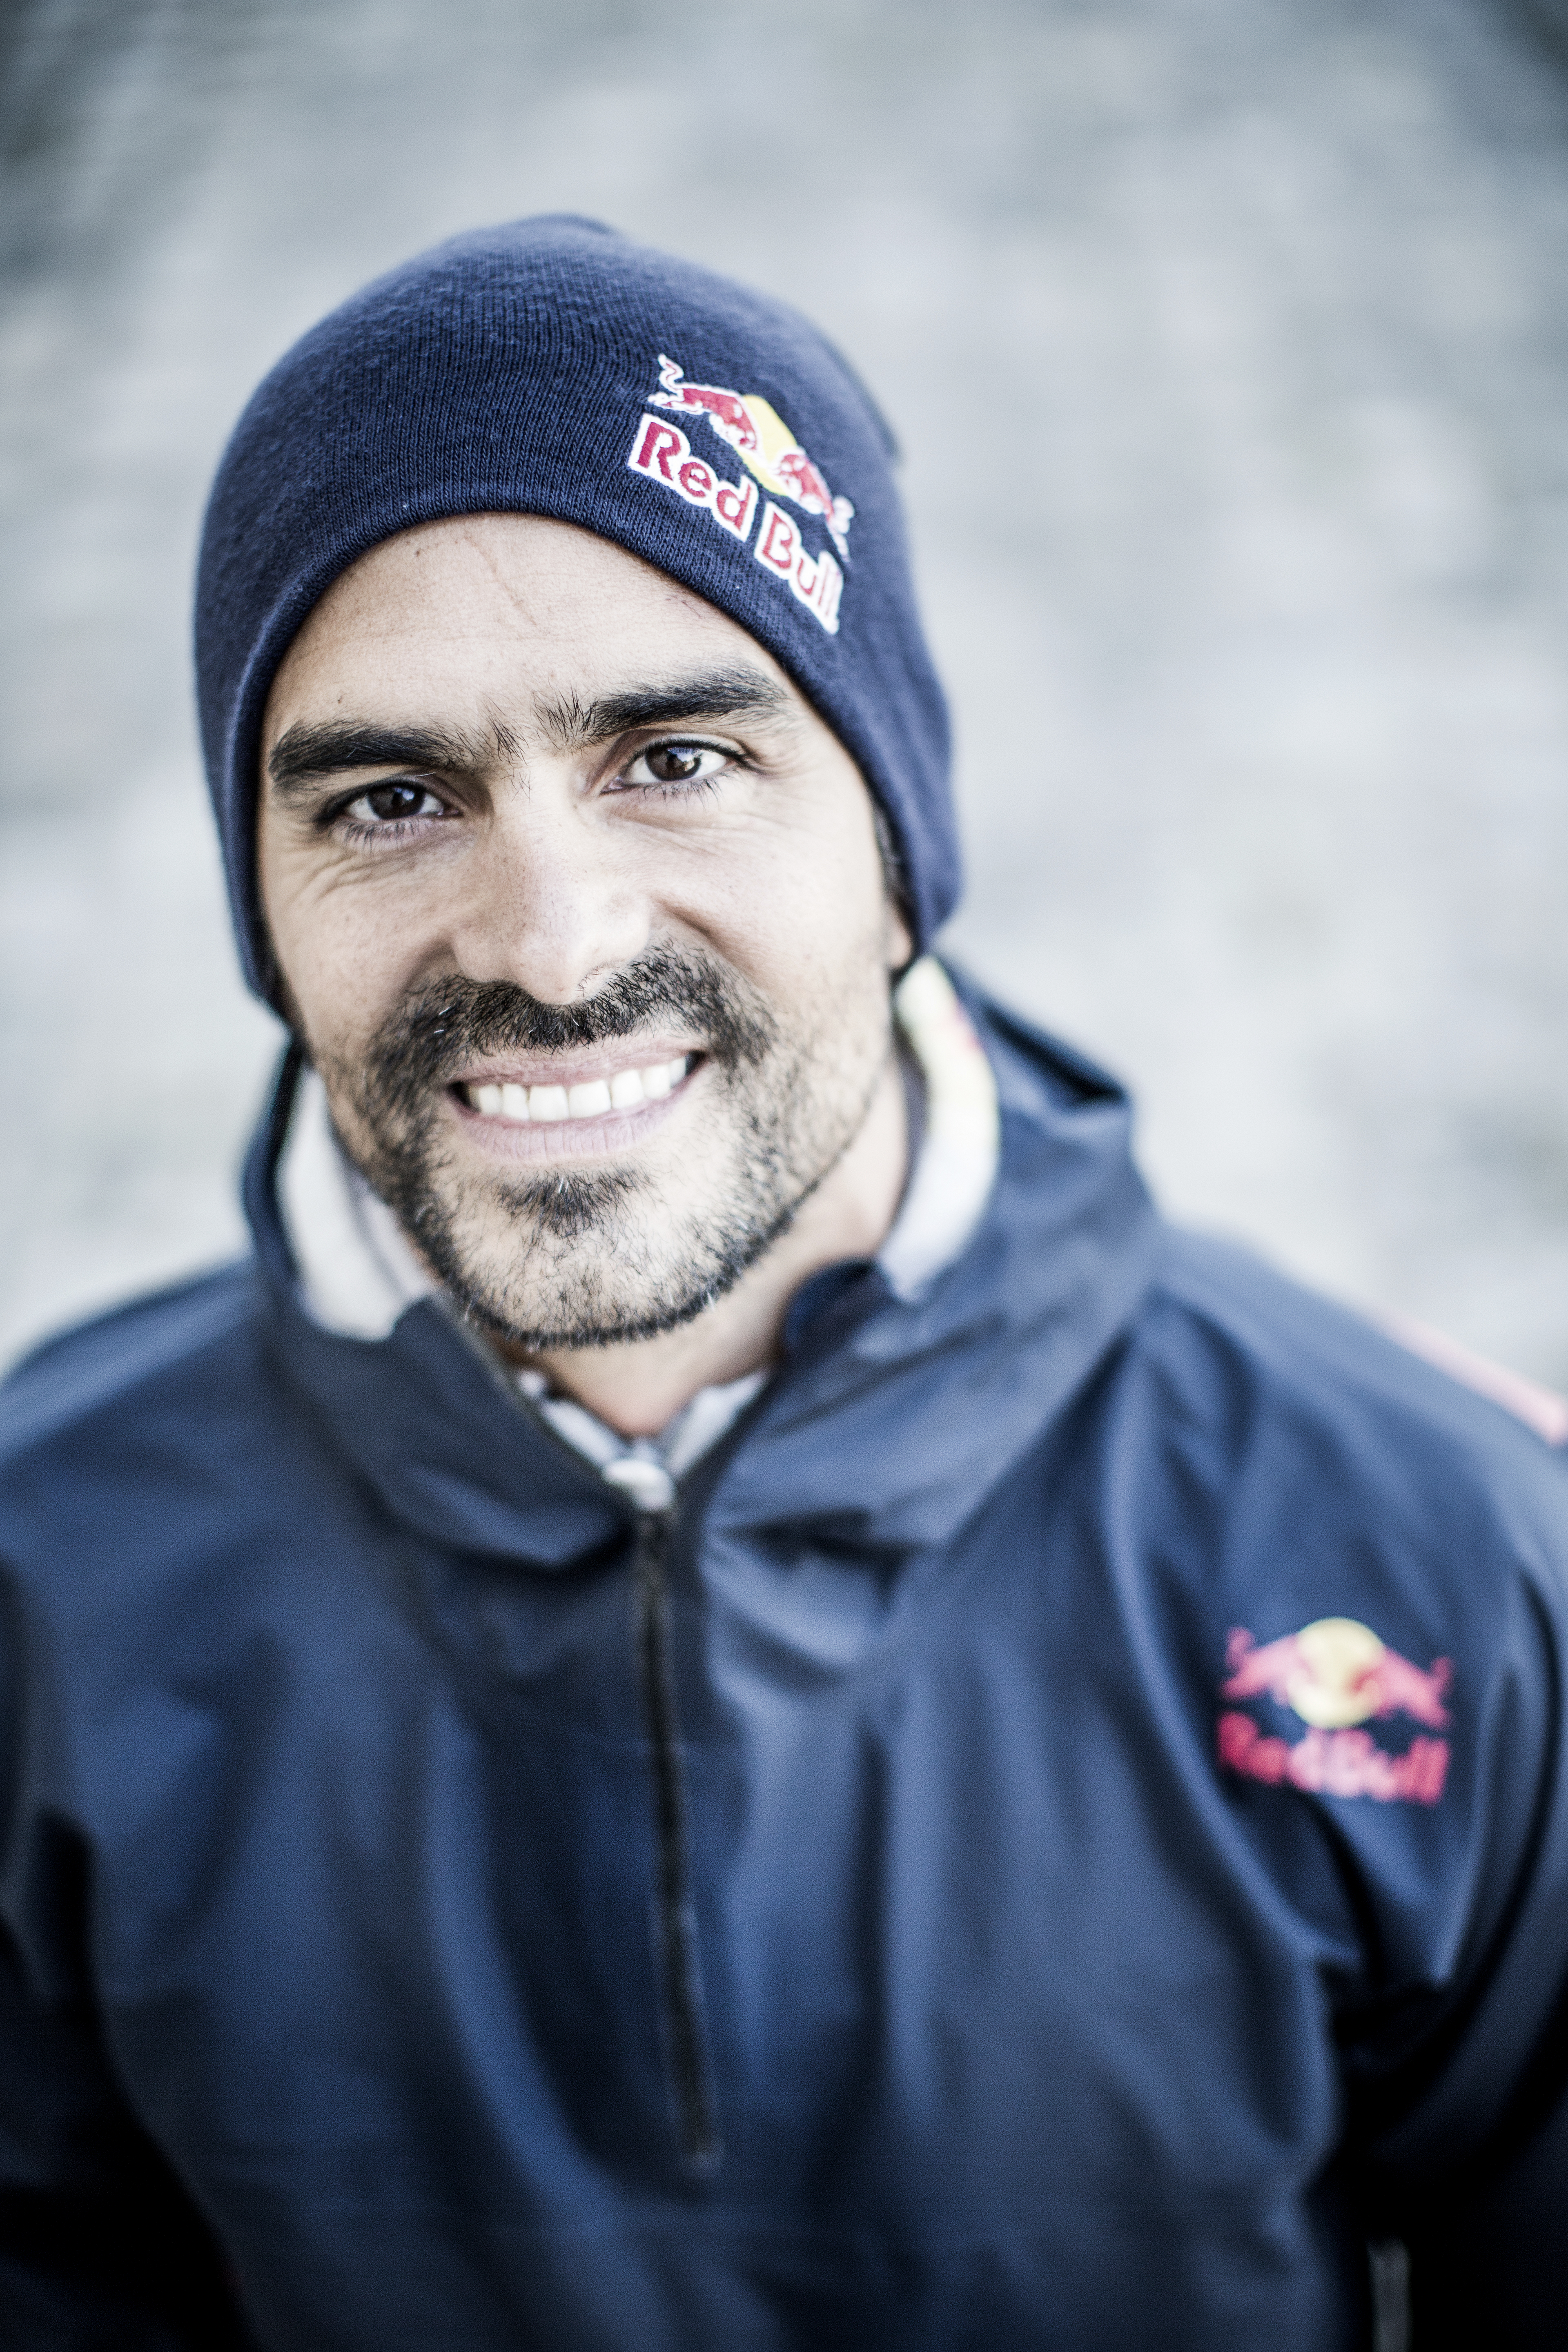 Orlando Duque by Romina Amato_Red Bull Content Pool